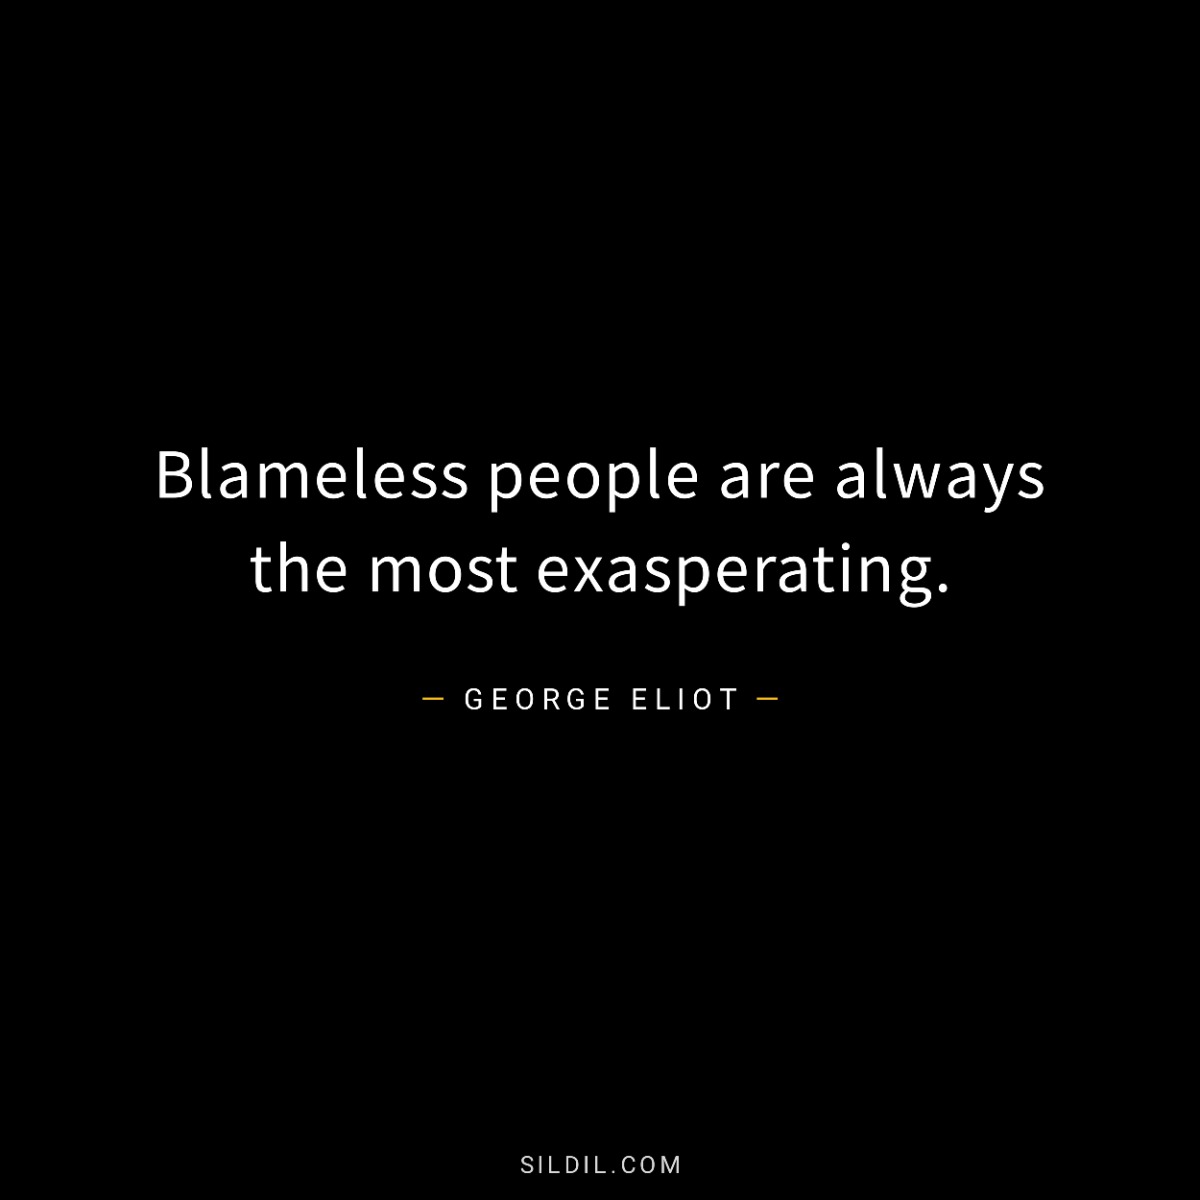 Blameless people are always the most exasperating.